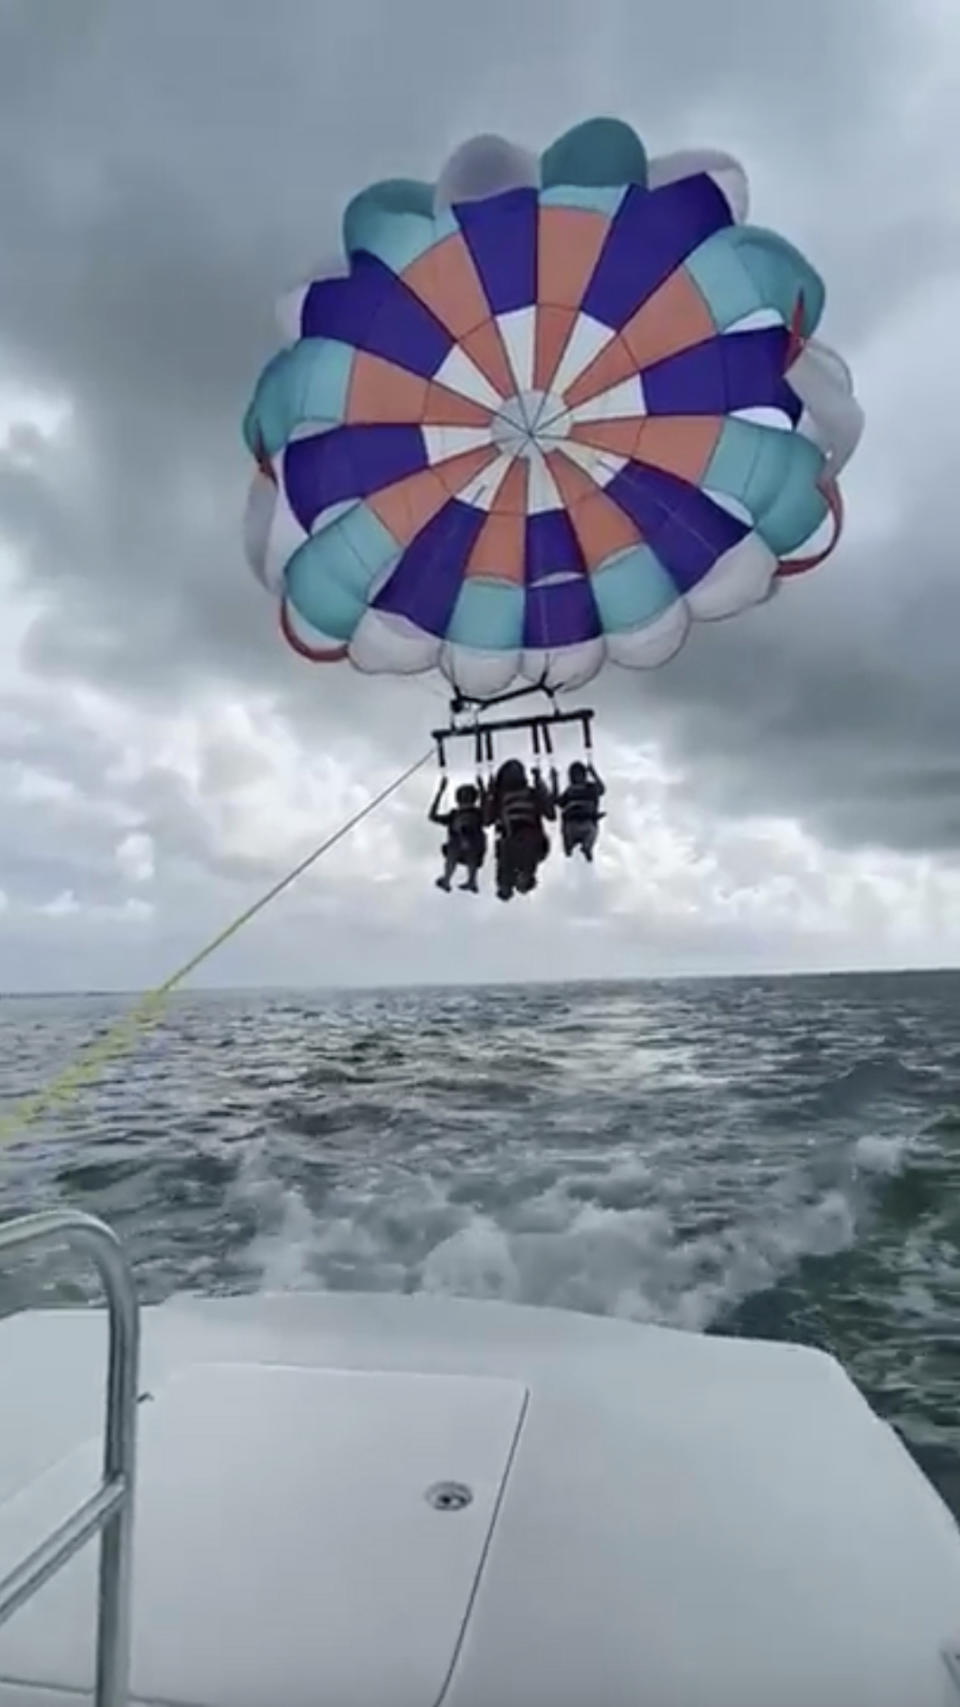 This screenshot made from a video released by the Alaparthi Family shows Supraja Alaparthi, 33, center, with her son and nephew as they parasail in the Florida Keys in June 2022. Alaparthi was killed after being dragged across the water while strapped into the parasail and slamming into a bridge. Attorneys representing the family have filed a wrongful death lawsuit against the captain, a crew member and a Florida resort company that owns the marina where the boat was based. (Alaparthi Family via AP)